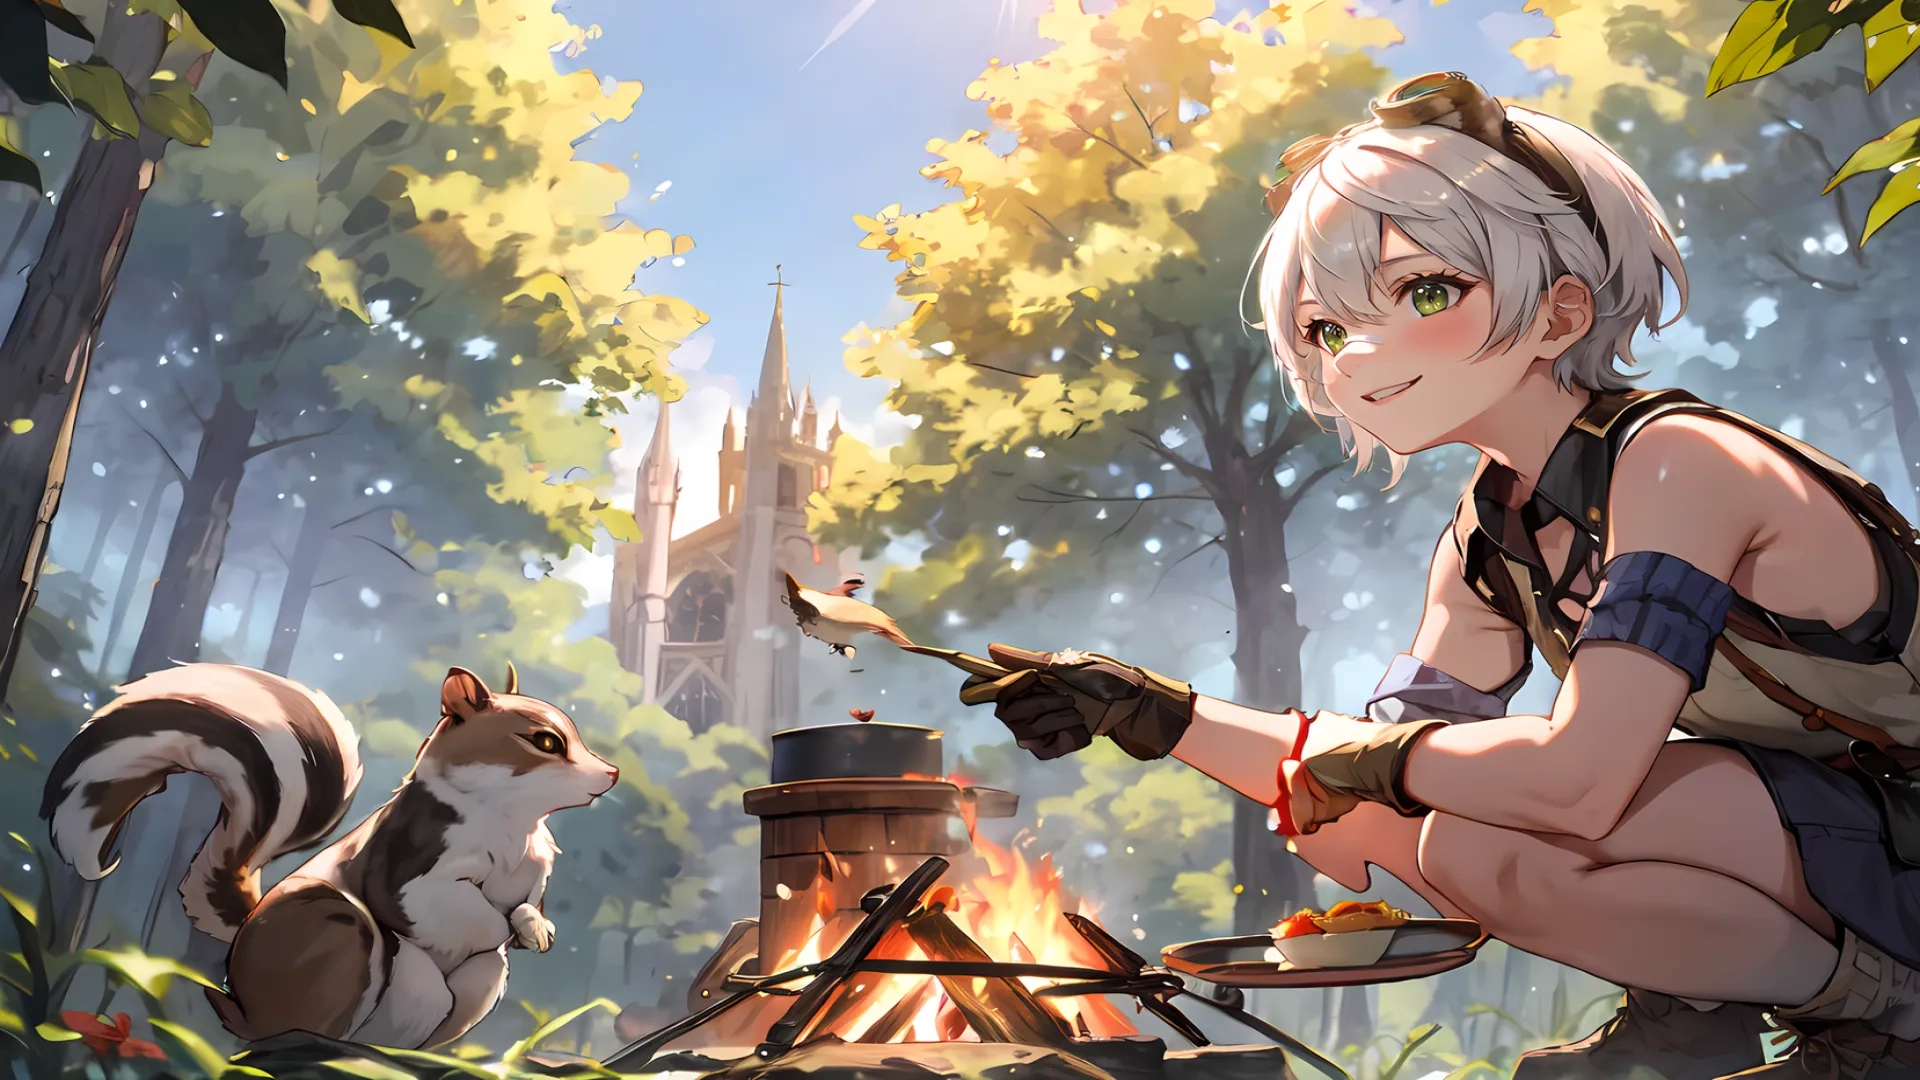 a woman kneeling down cooking something on a campfire next to two squirrels and a cathedral tower in the background and trees in the foreground
